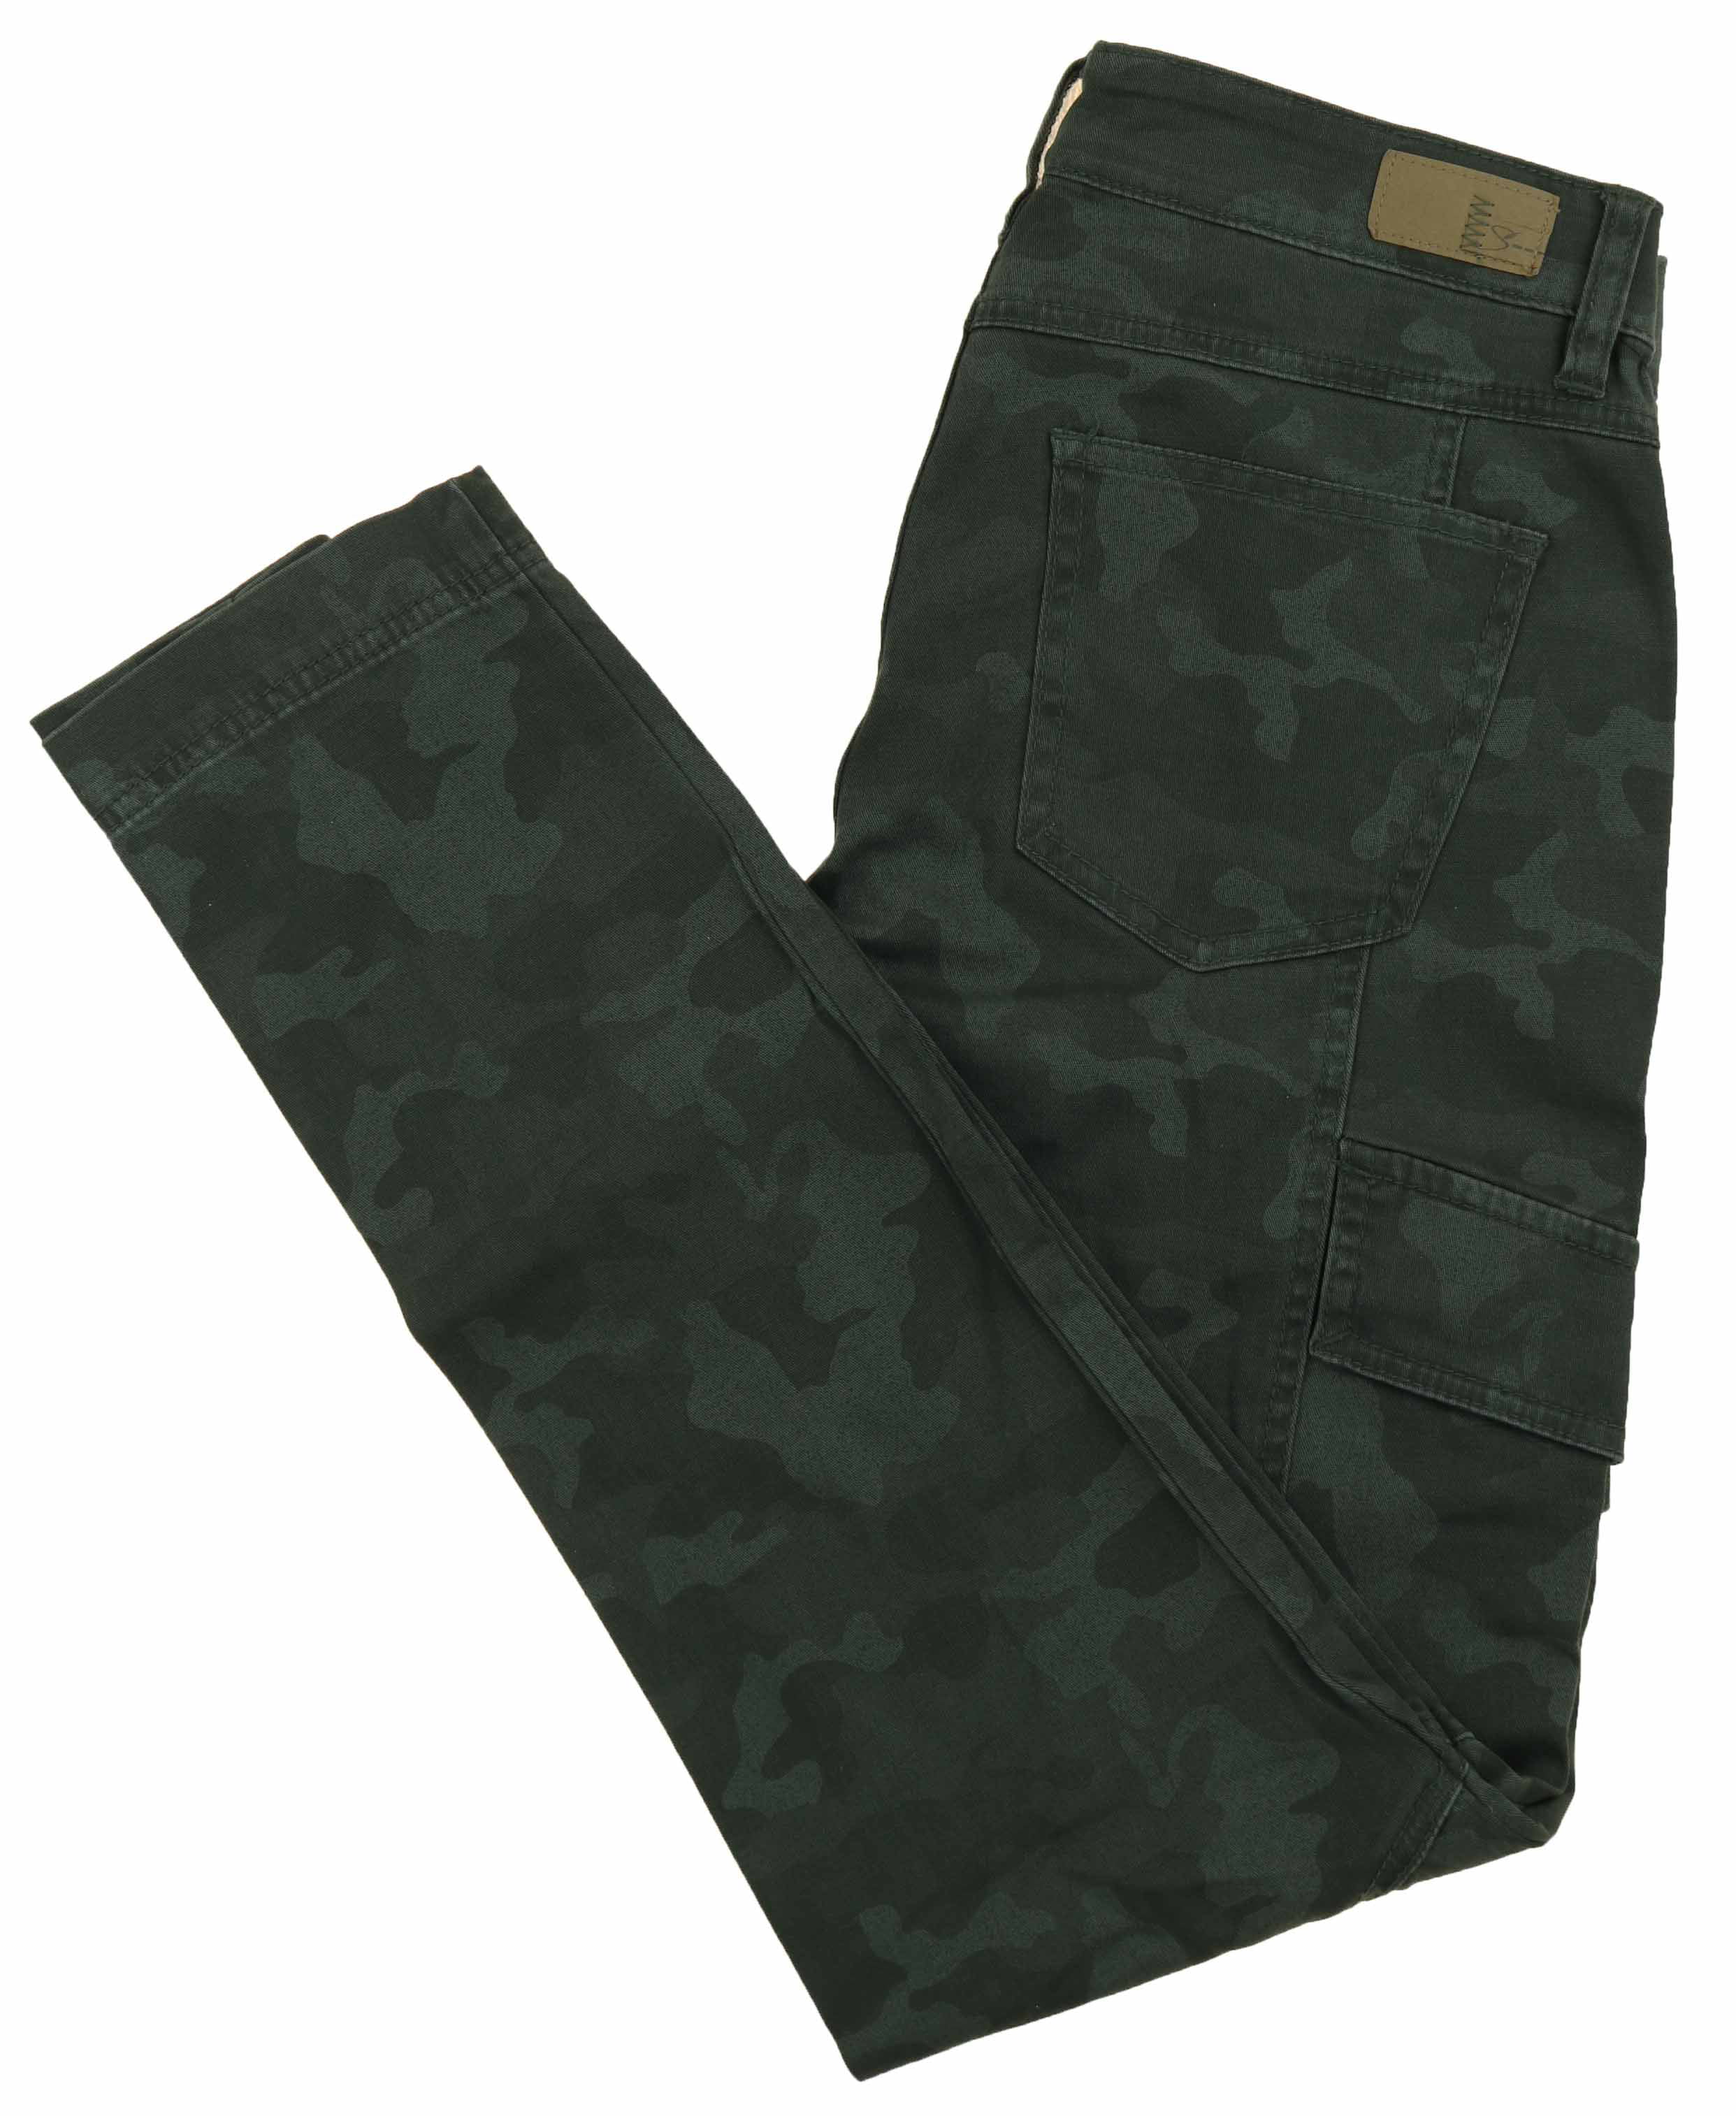 supplies by unionbay cargo pants